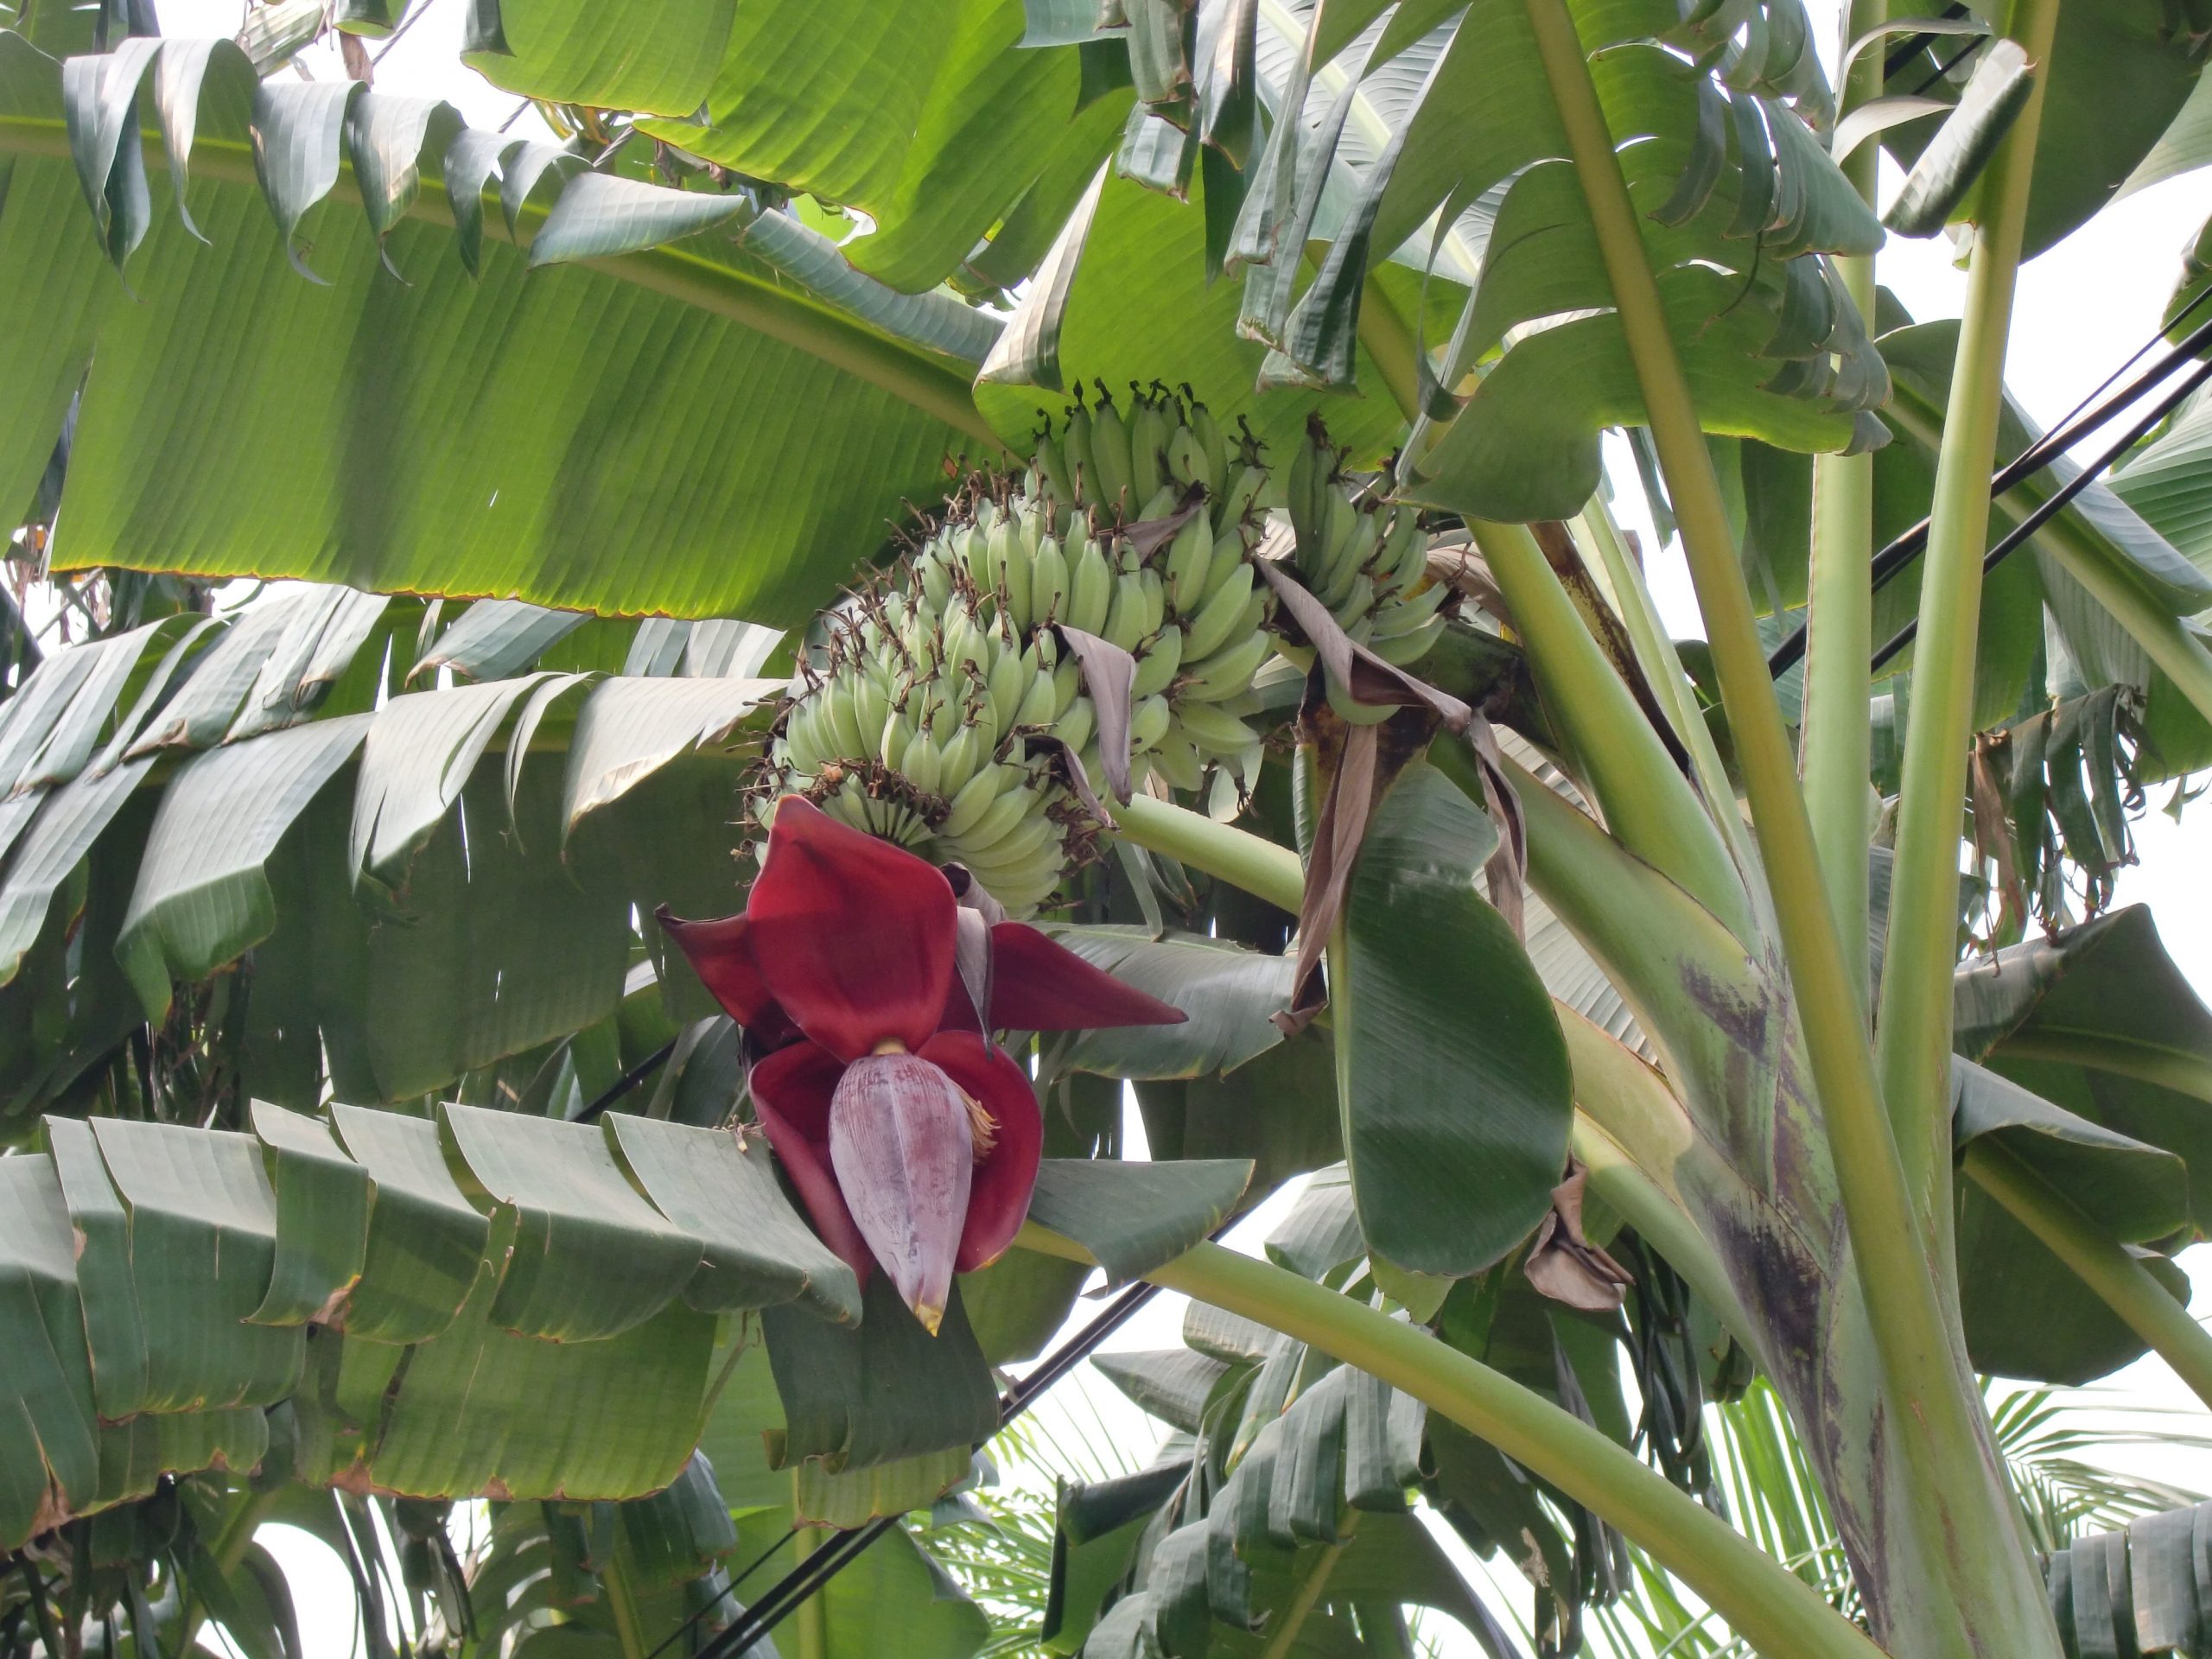 10 types of banana trees – Some species of the genus Musa